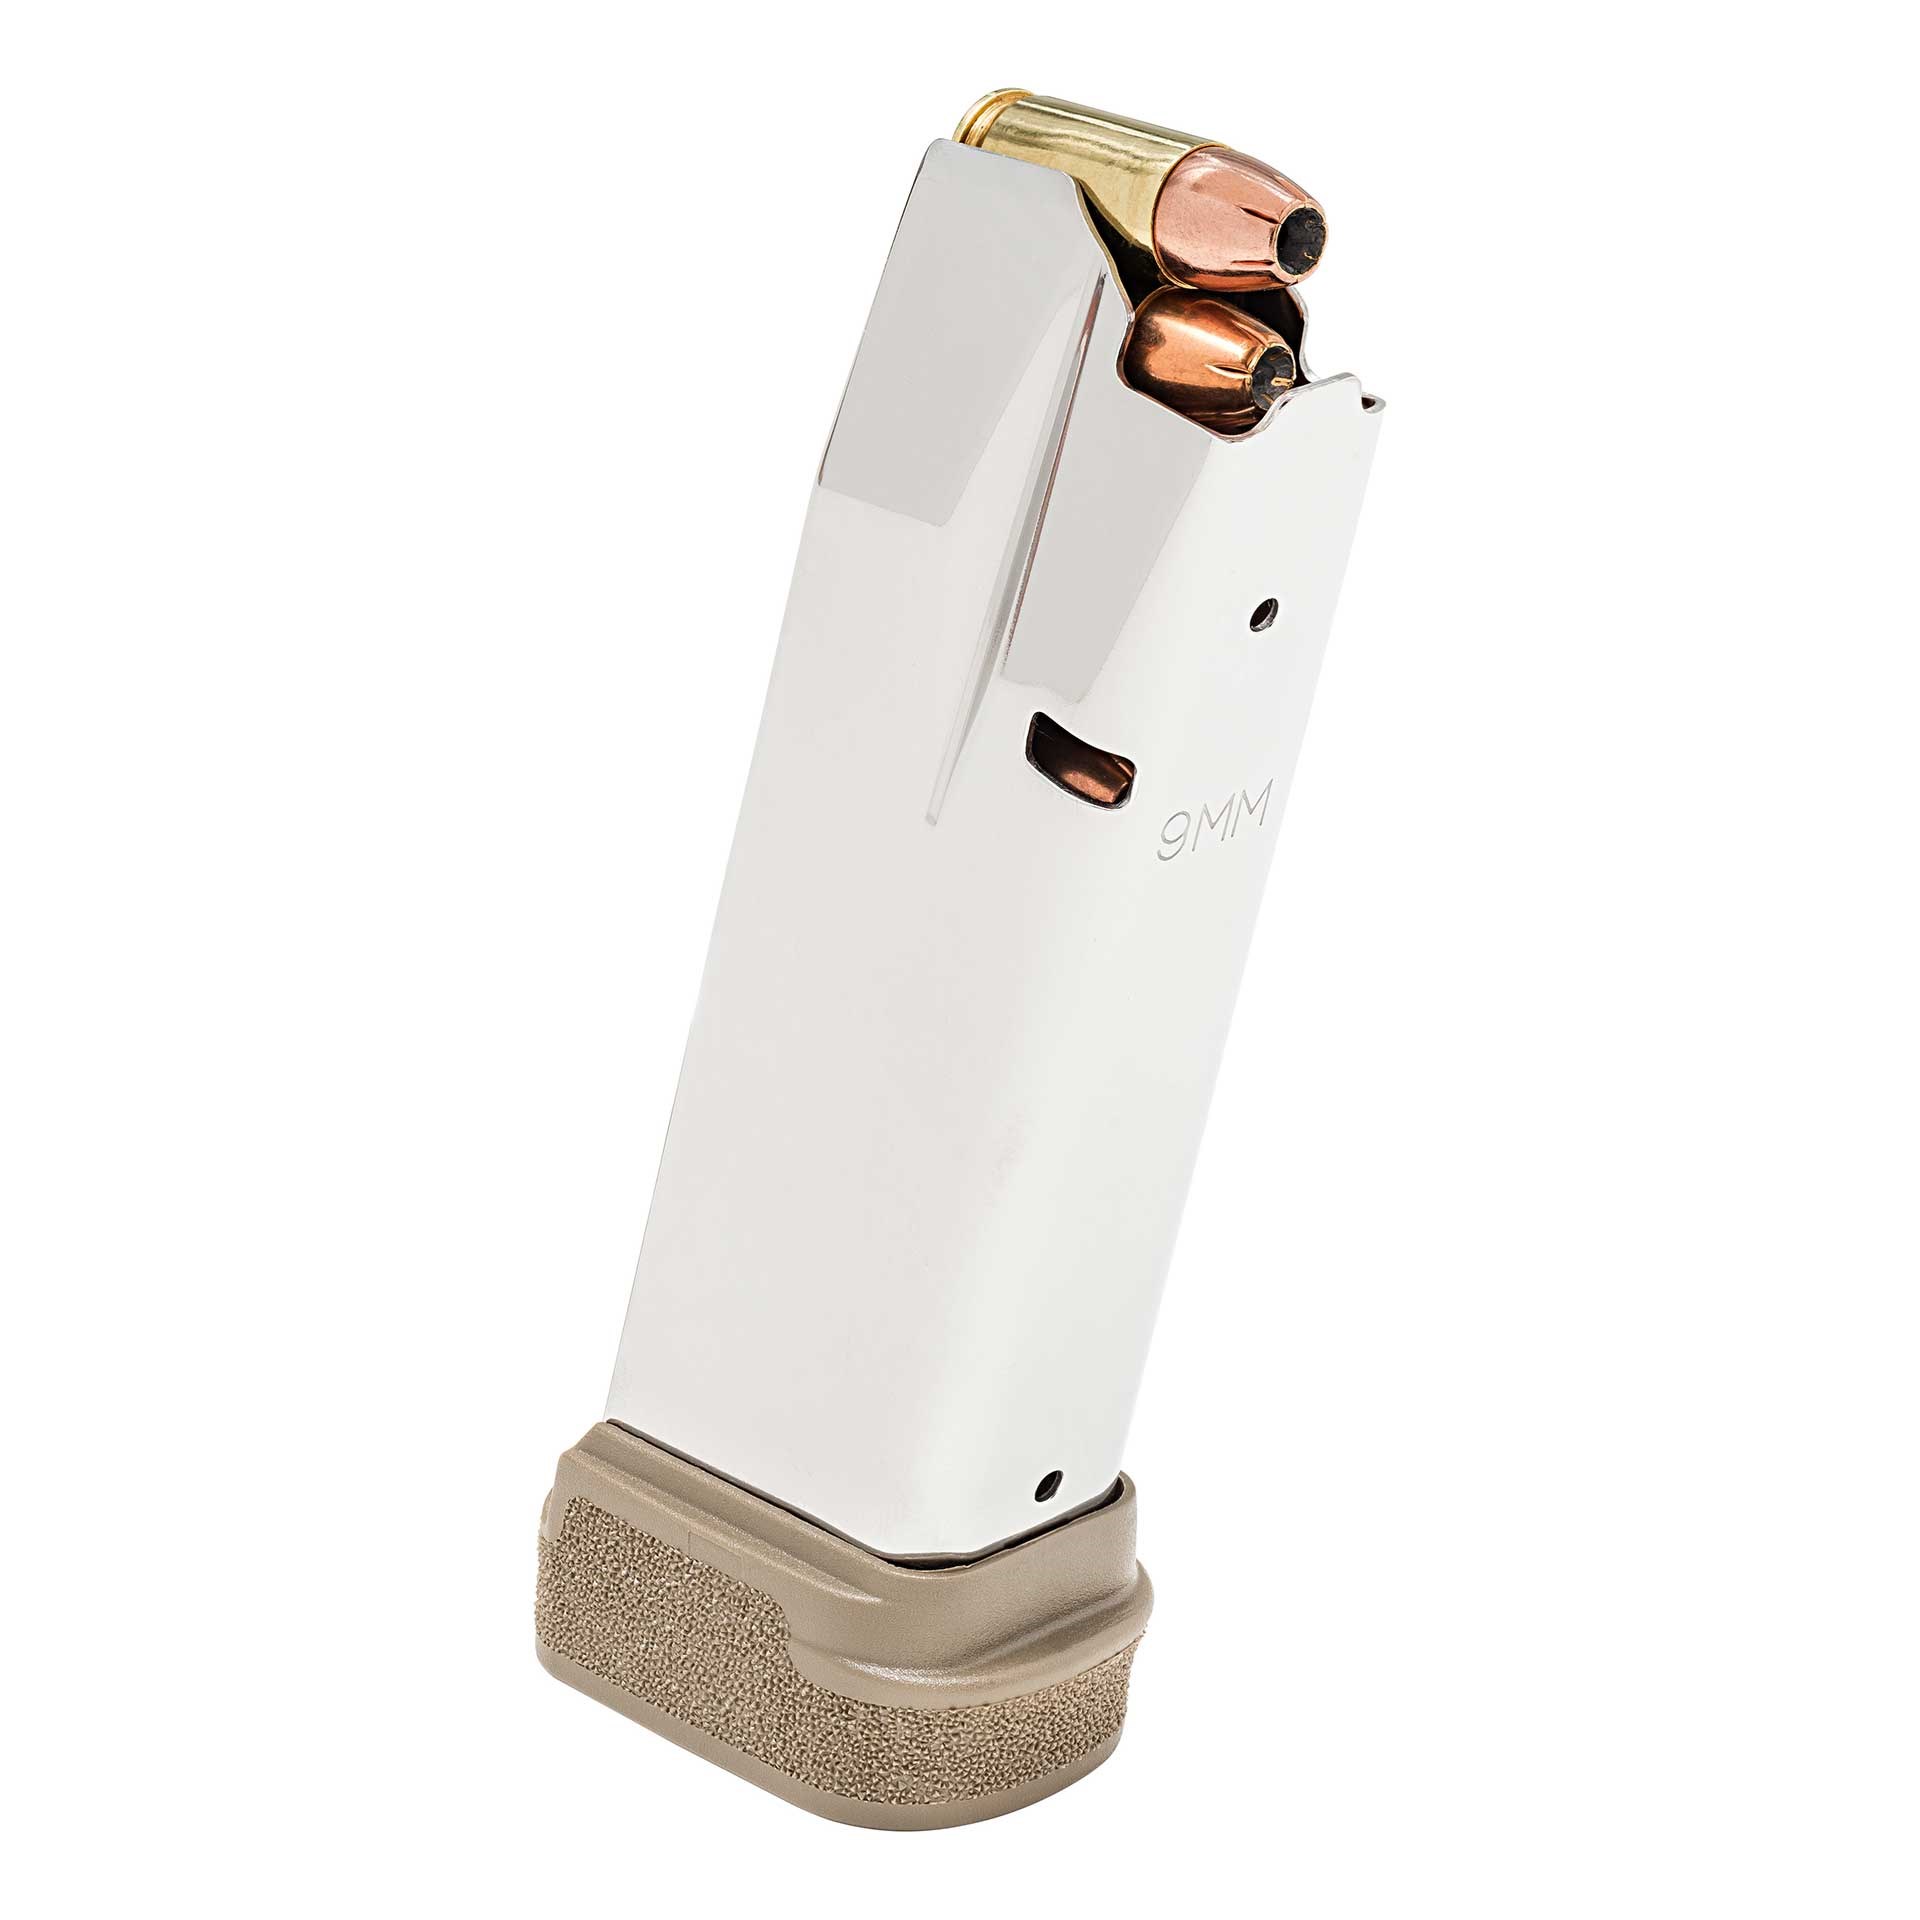 FDE model of the Springfield Hellcat Pro 17-round magazine with rounds loaded.